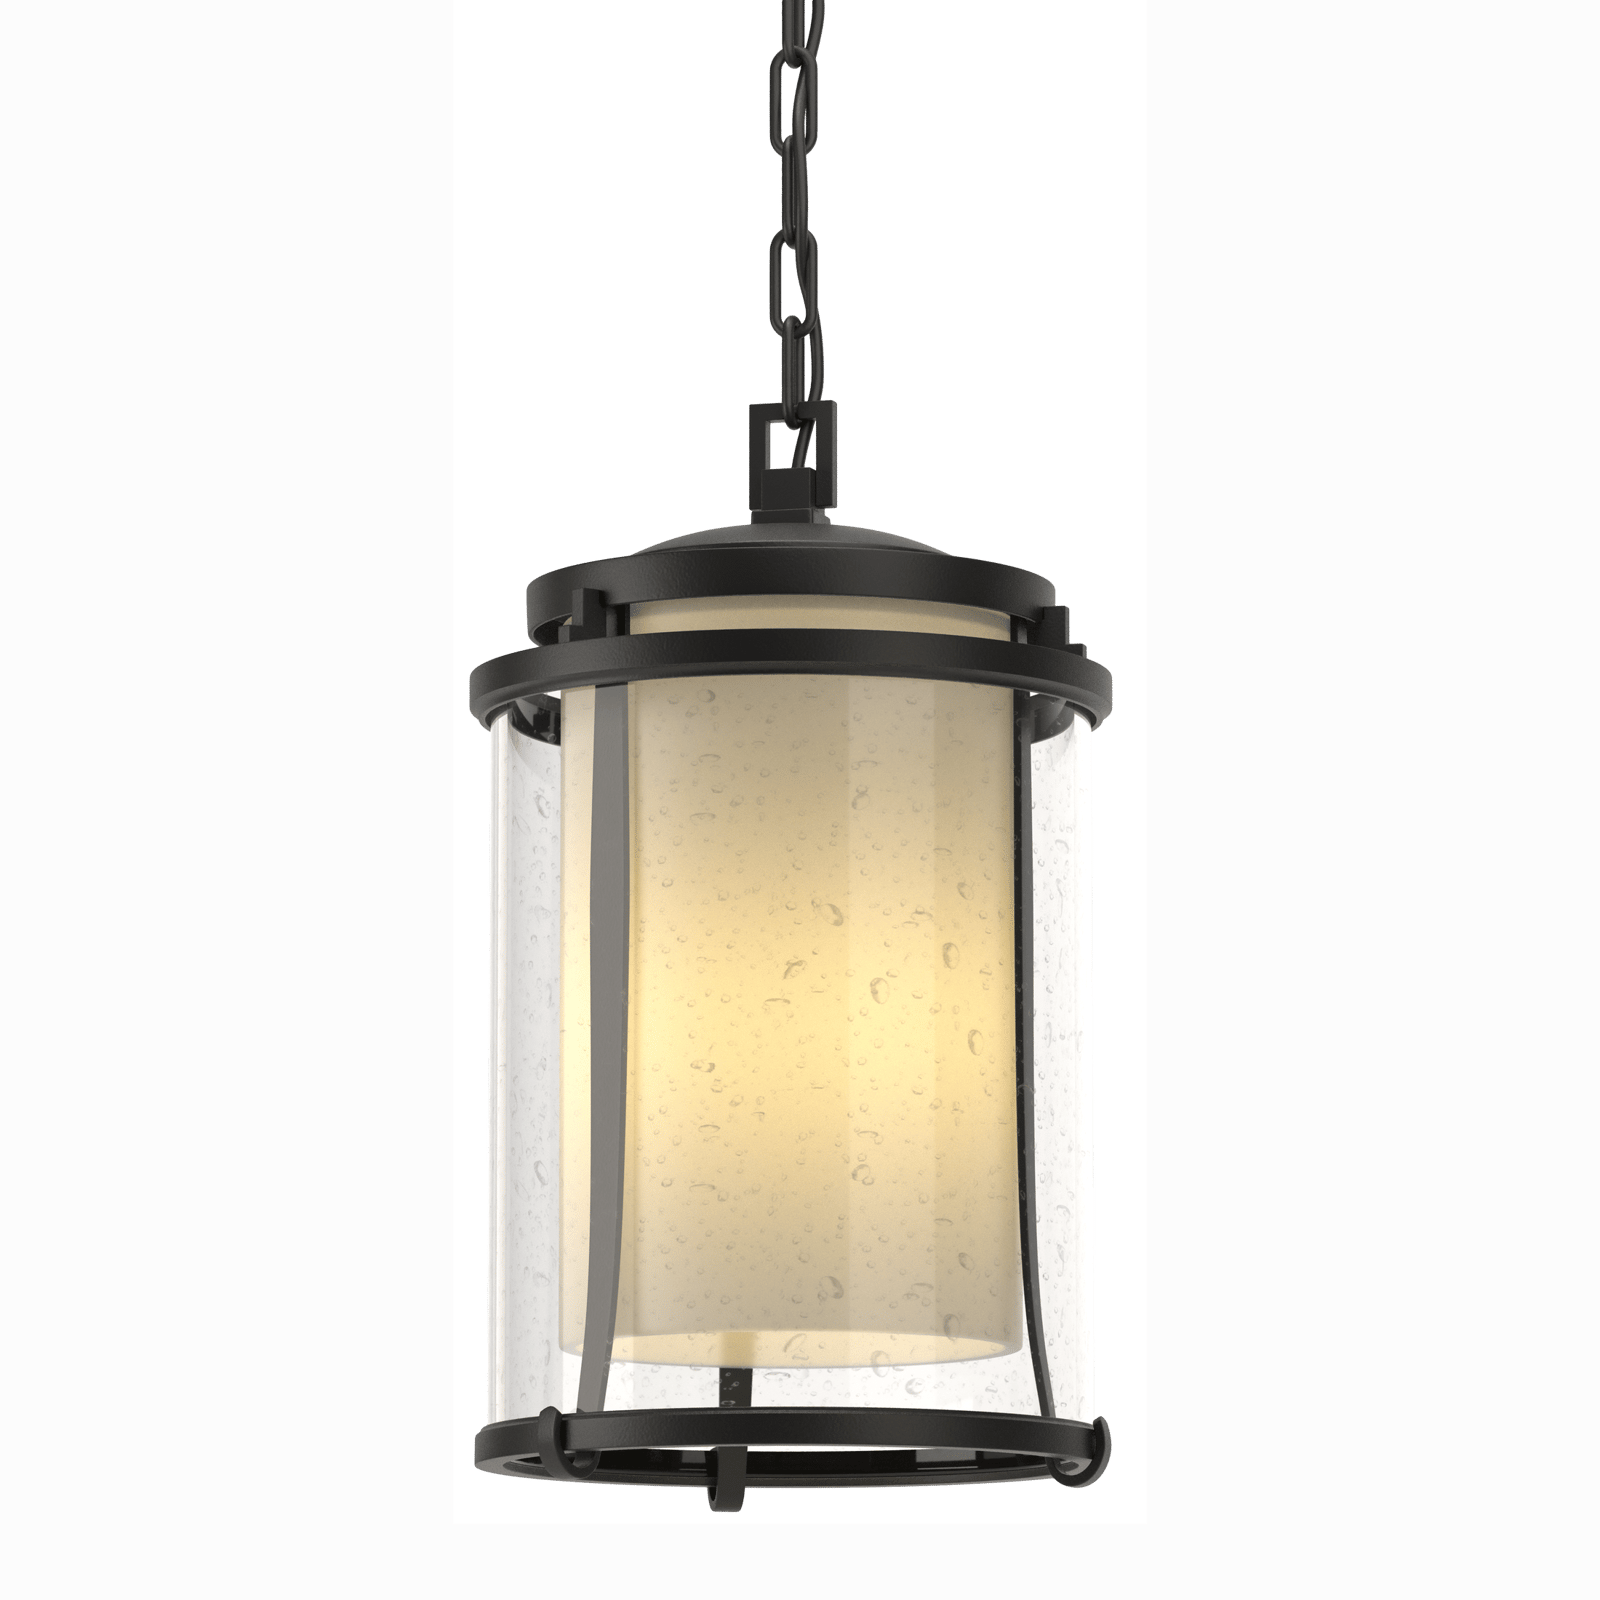 Hubbardton Forge Meridian Large Outdoor Ceiling Fixture